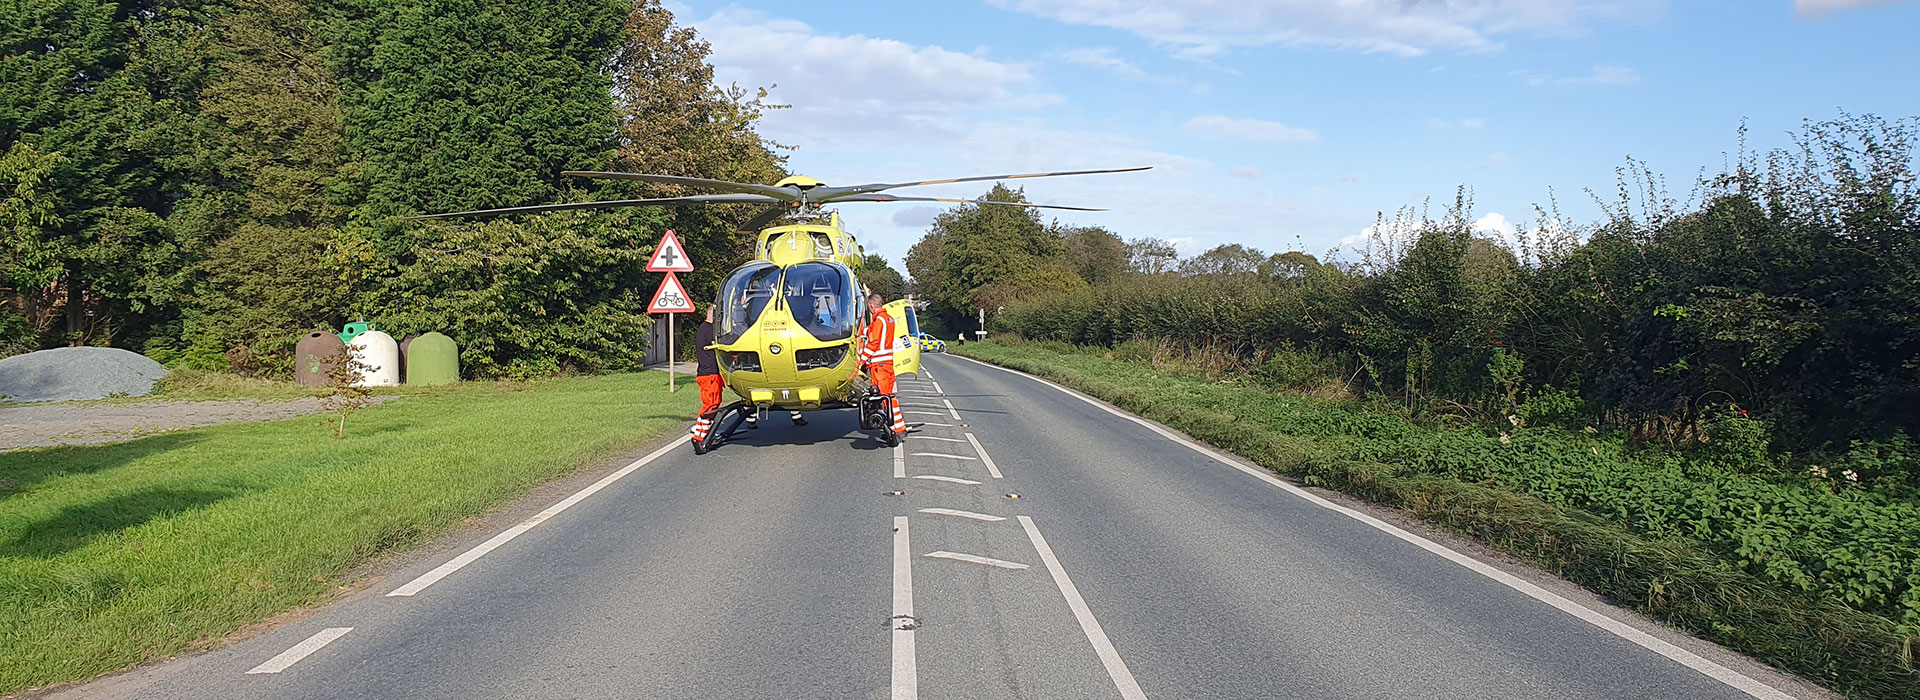 Helicopter in middle of road